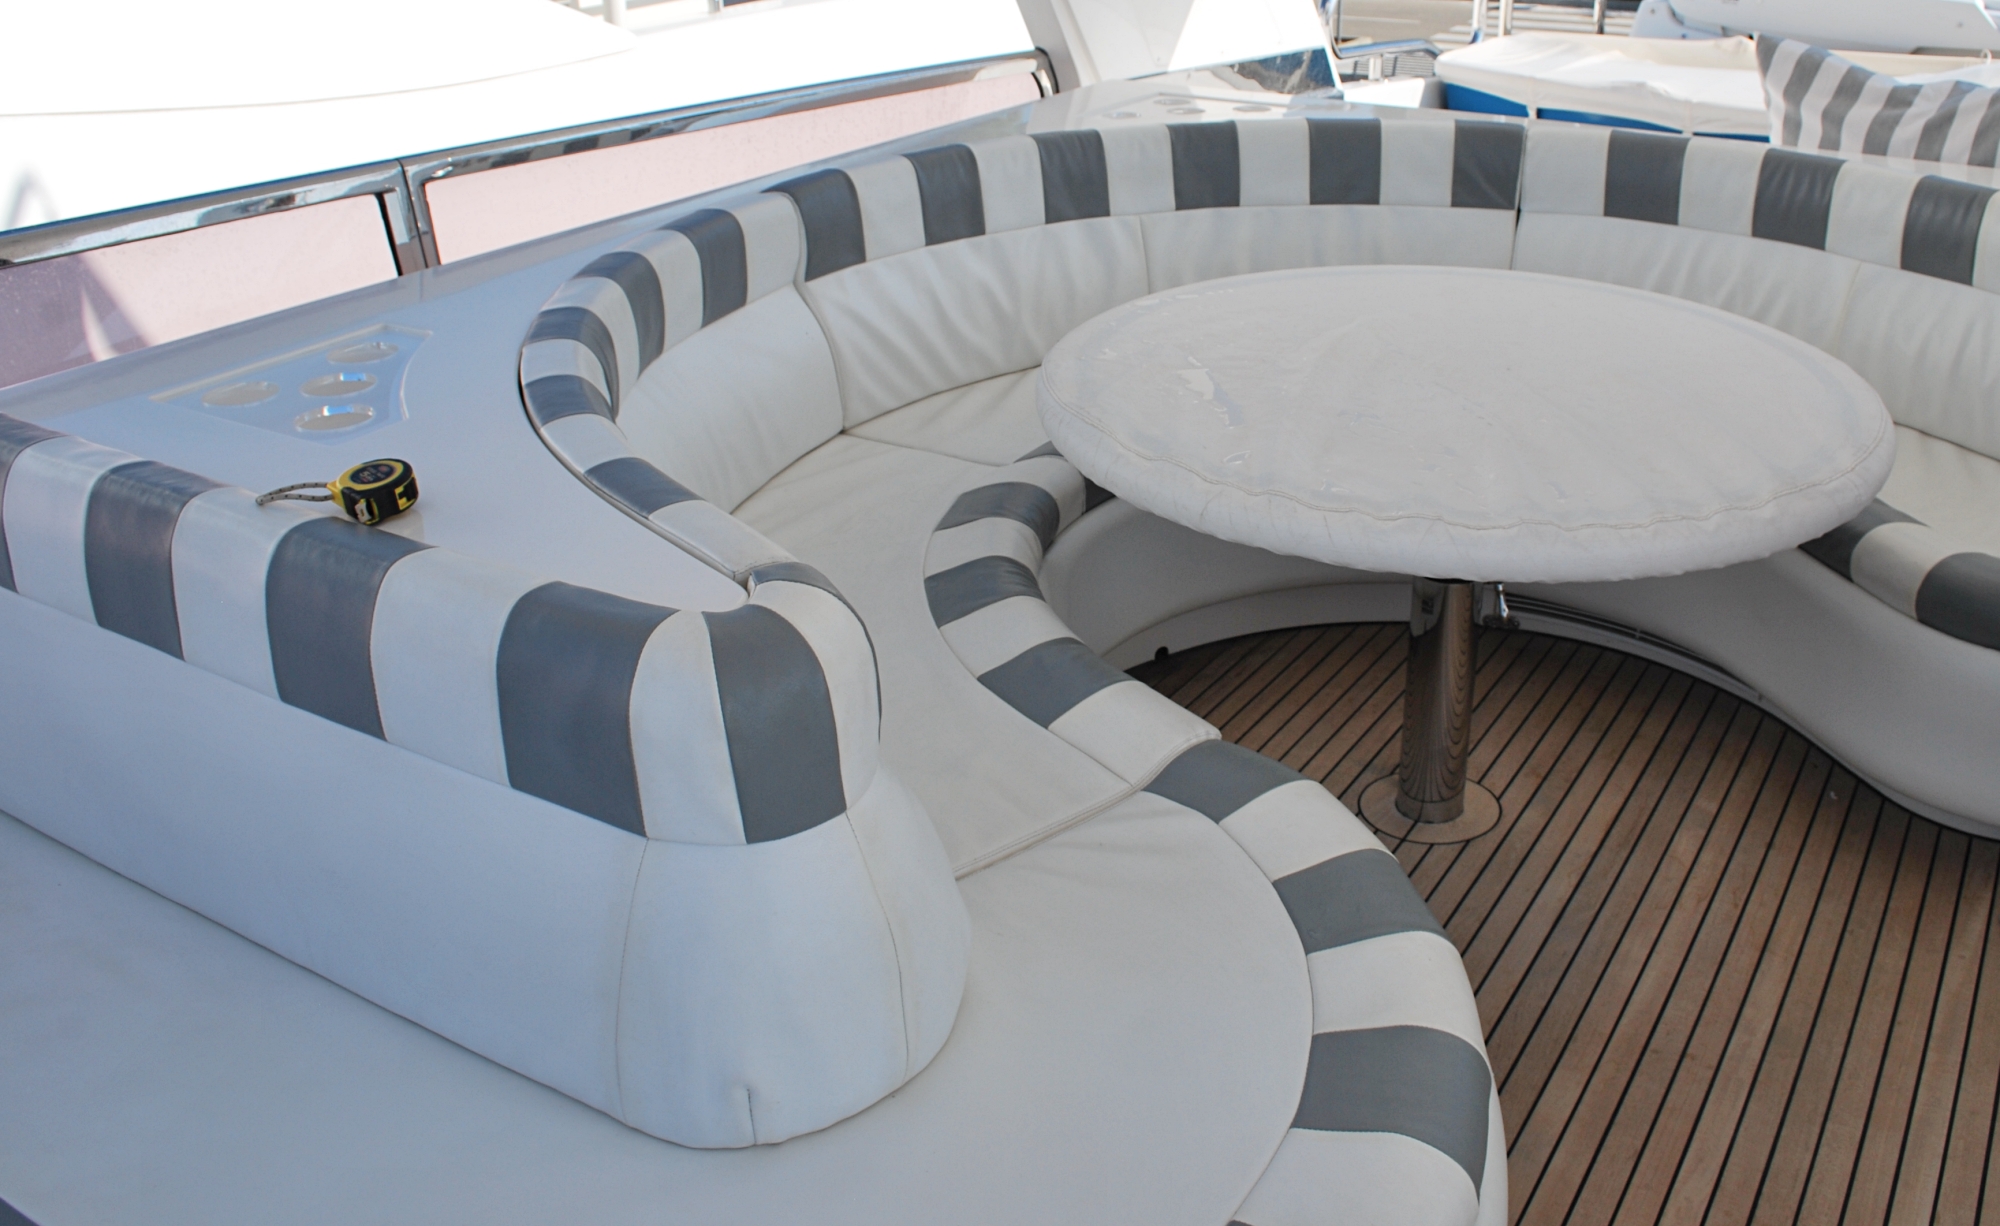 Challenge for Elegance 78ft flybridge zone. Stripes on backrests of saddles with large curves, need to match & be equally uniform allowing flawless flow.